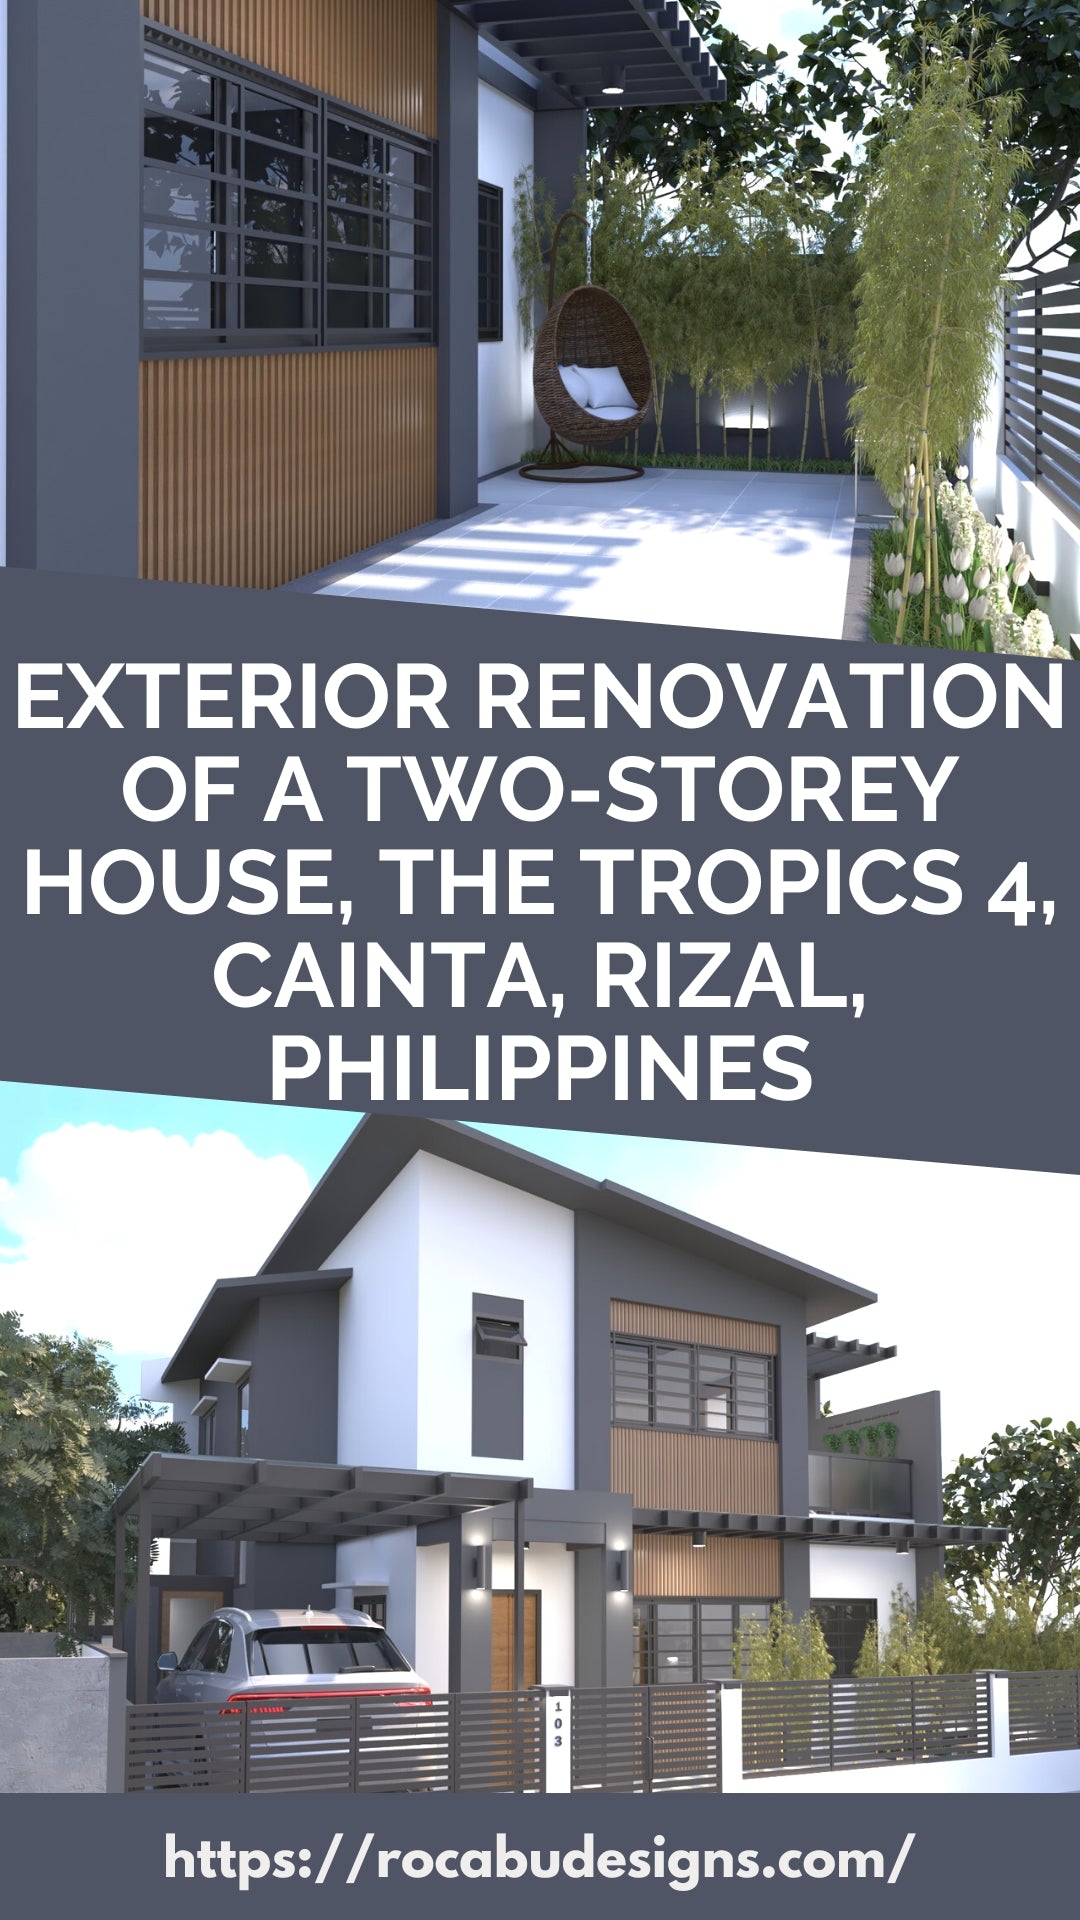 EXTERIOR RENOVATION OF A TWO-STOREY HOUSE, THE TROPICS 4, CAINTA, RIZAL, PHILIPPINES